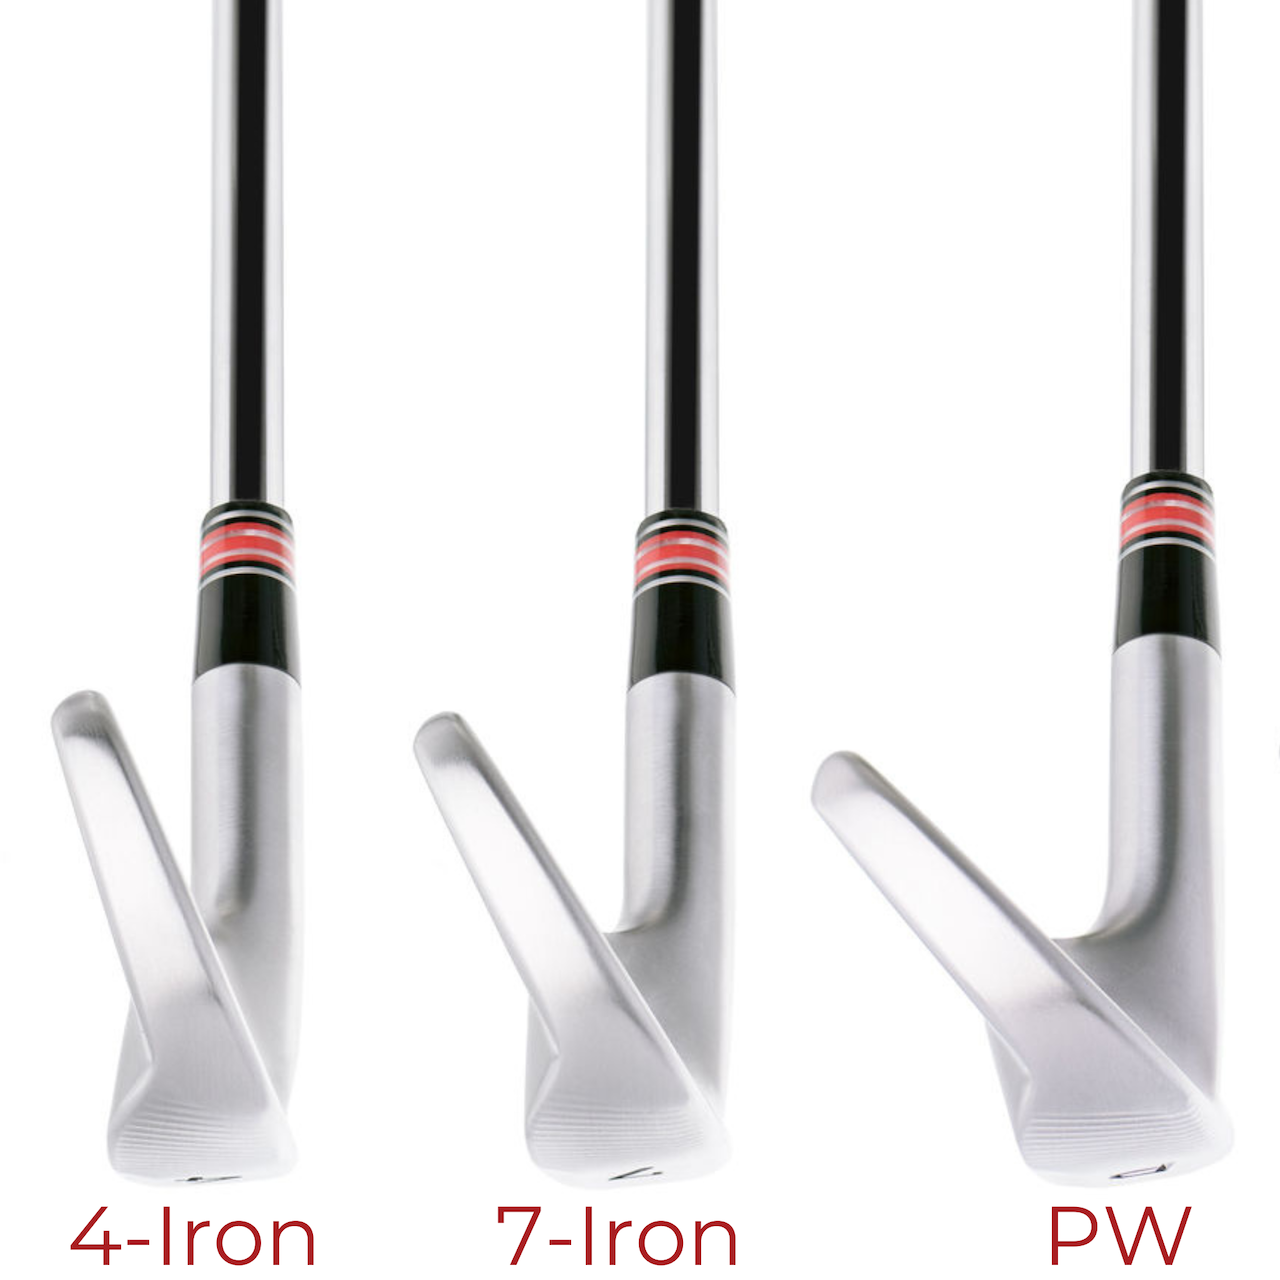 Edel Golf SMS Pro Irons Toe View Comparison